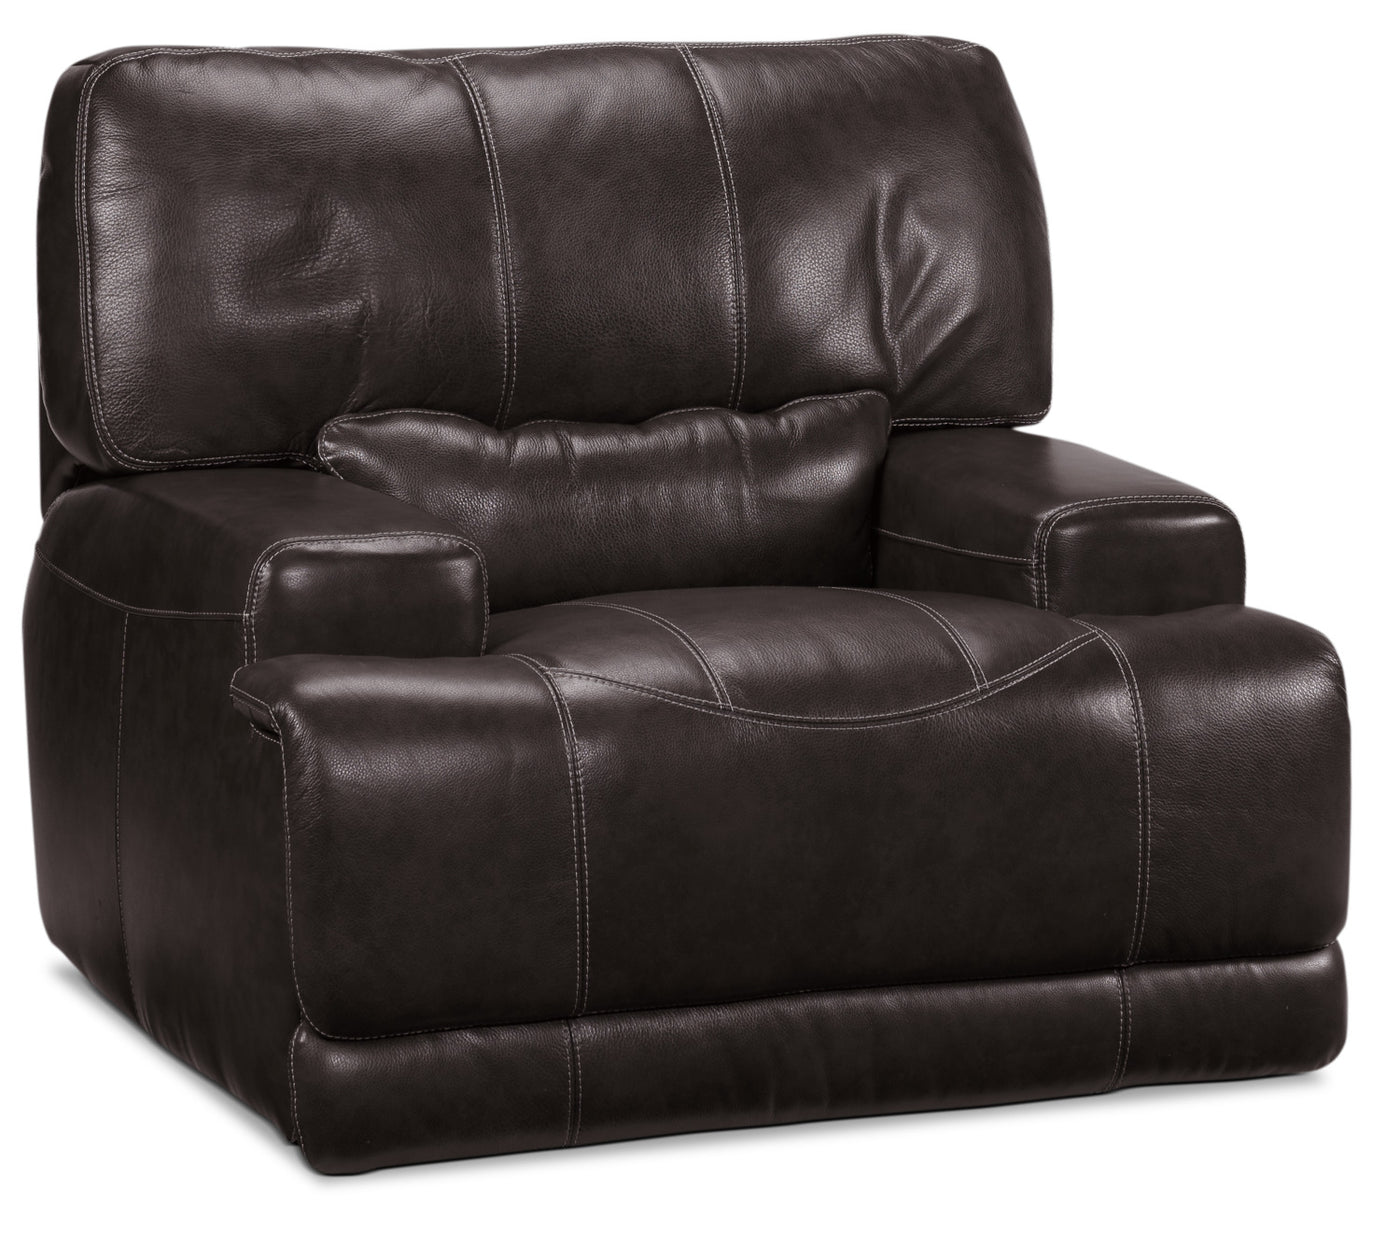 Dearborn Leather Power Reclining Sofa and Recliner Set - Blackberry